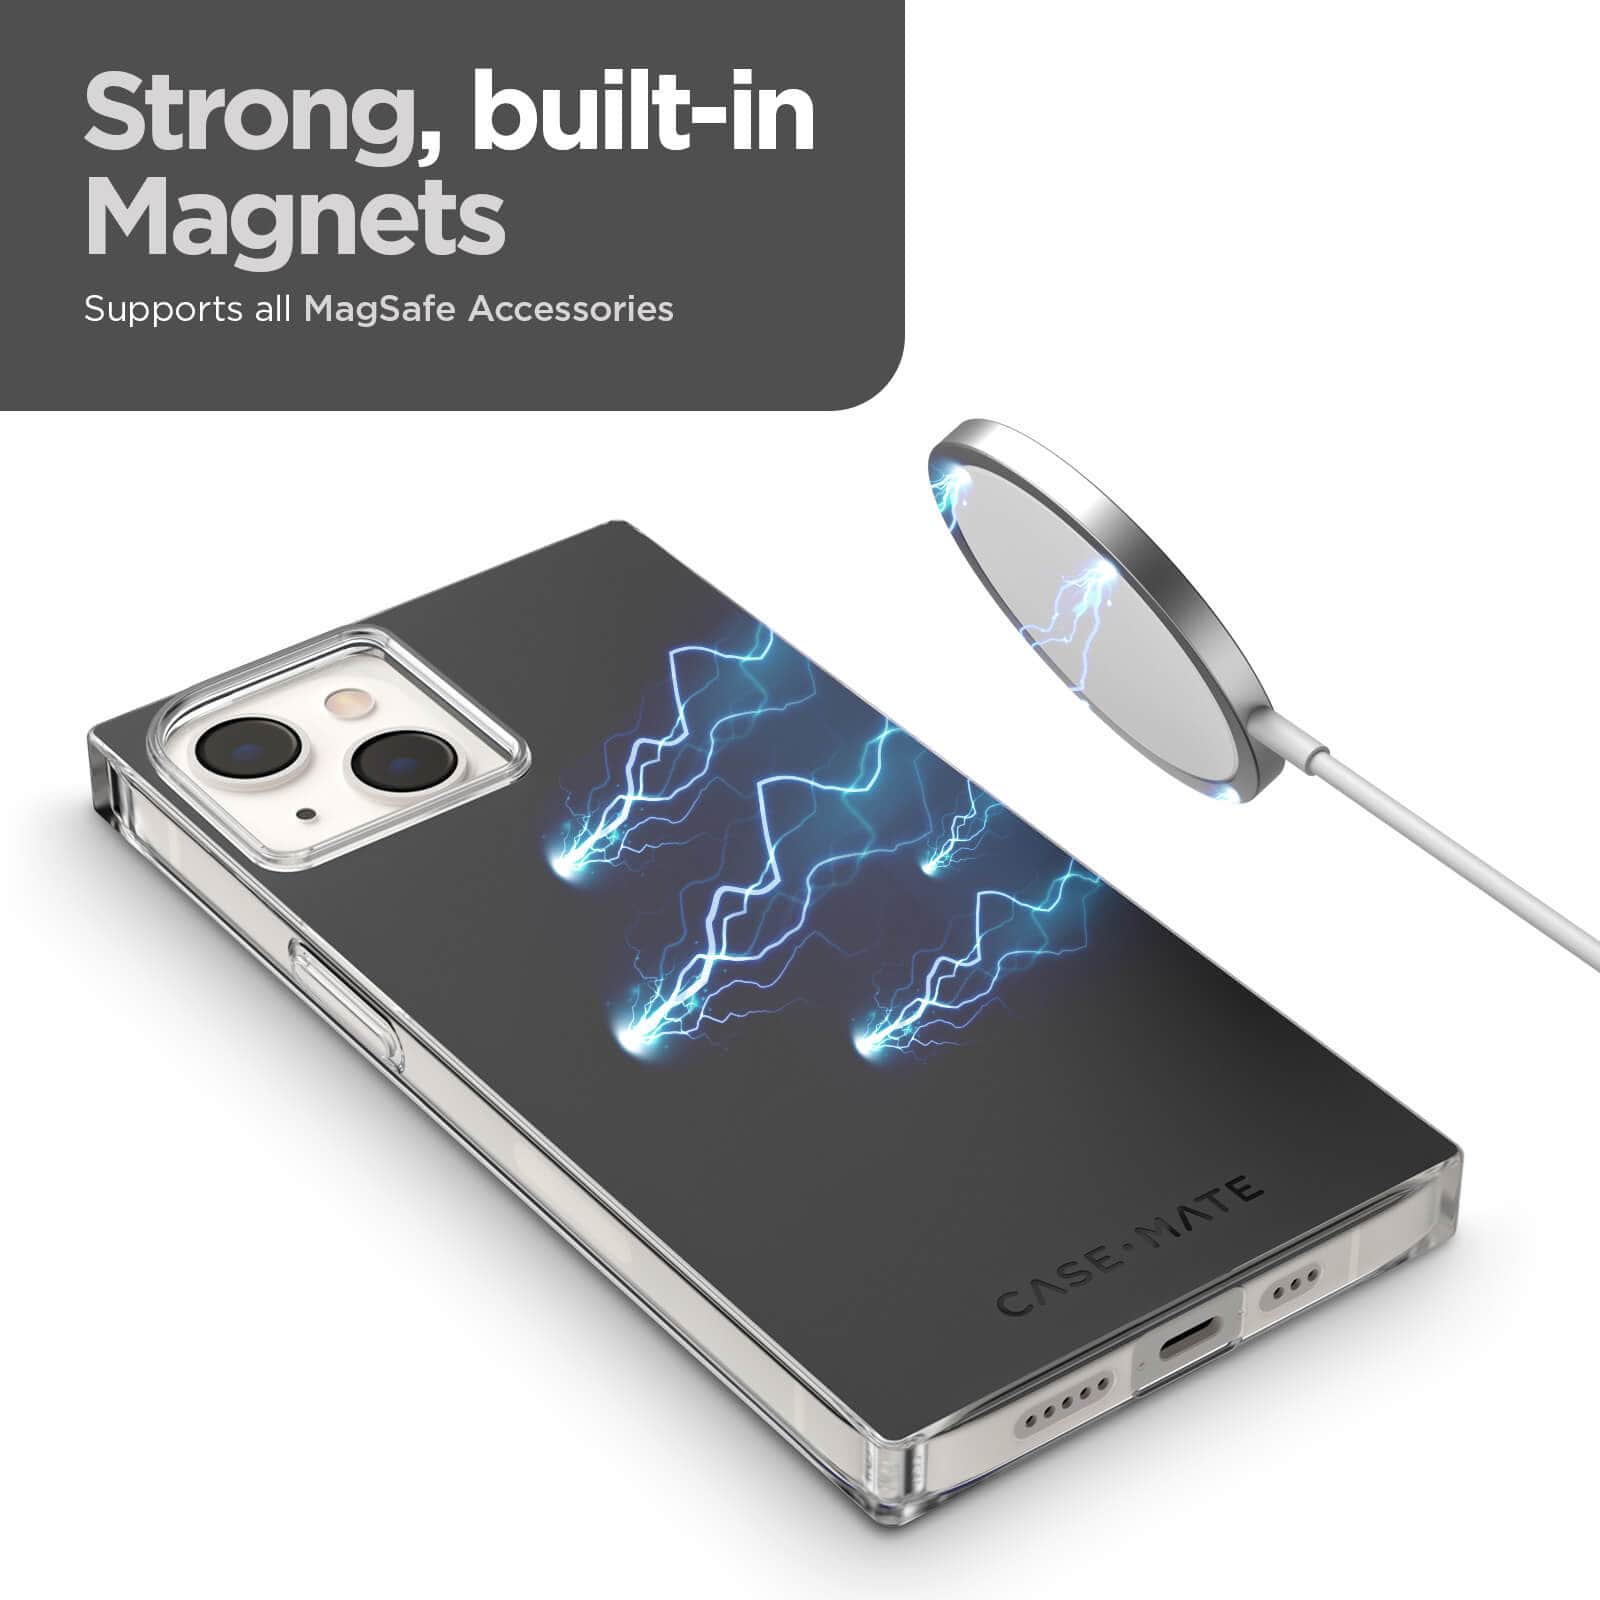 Strong, built-in magnets support all MagSafe accessories. color::Black